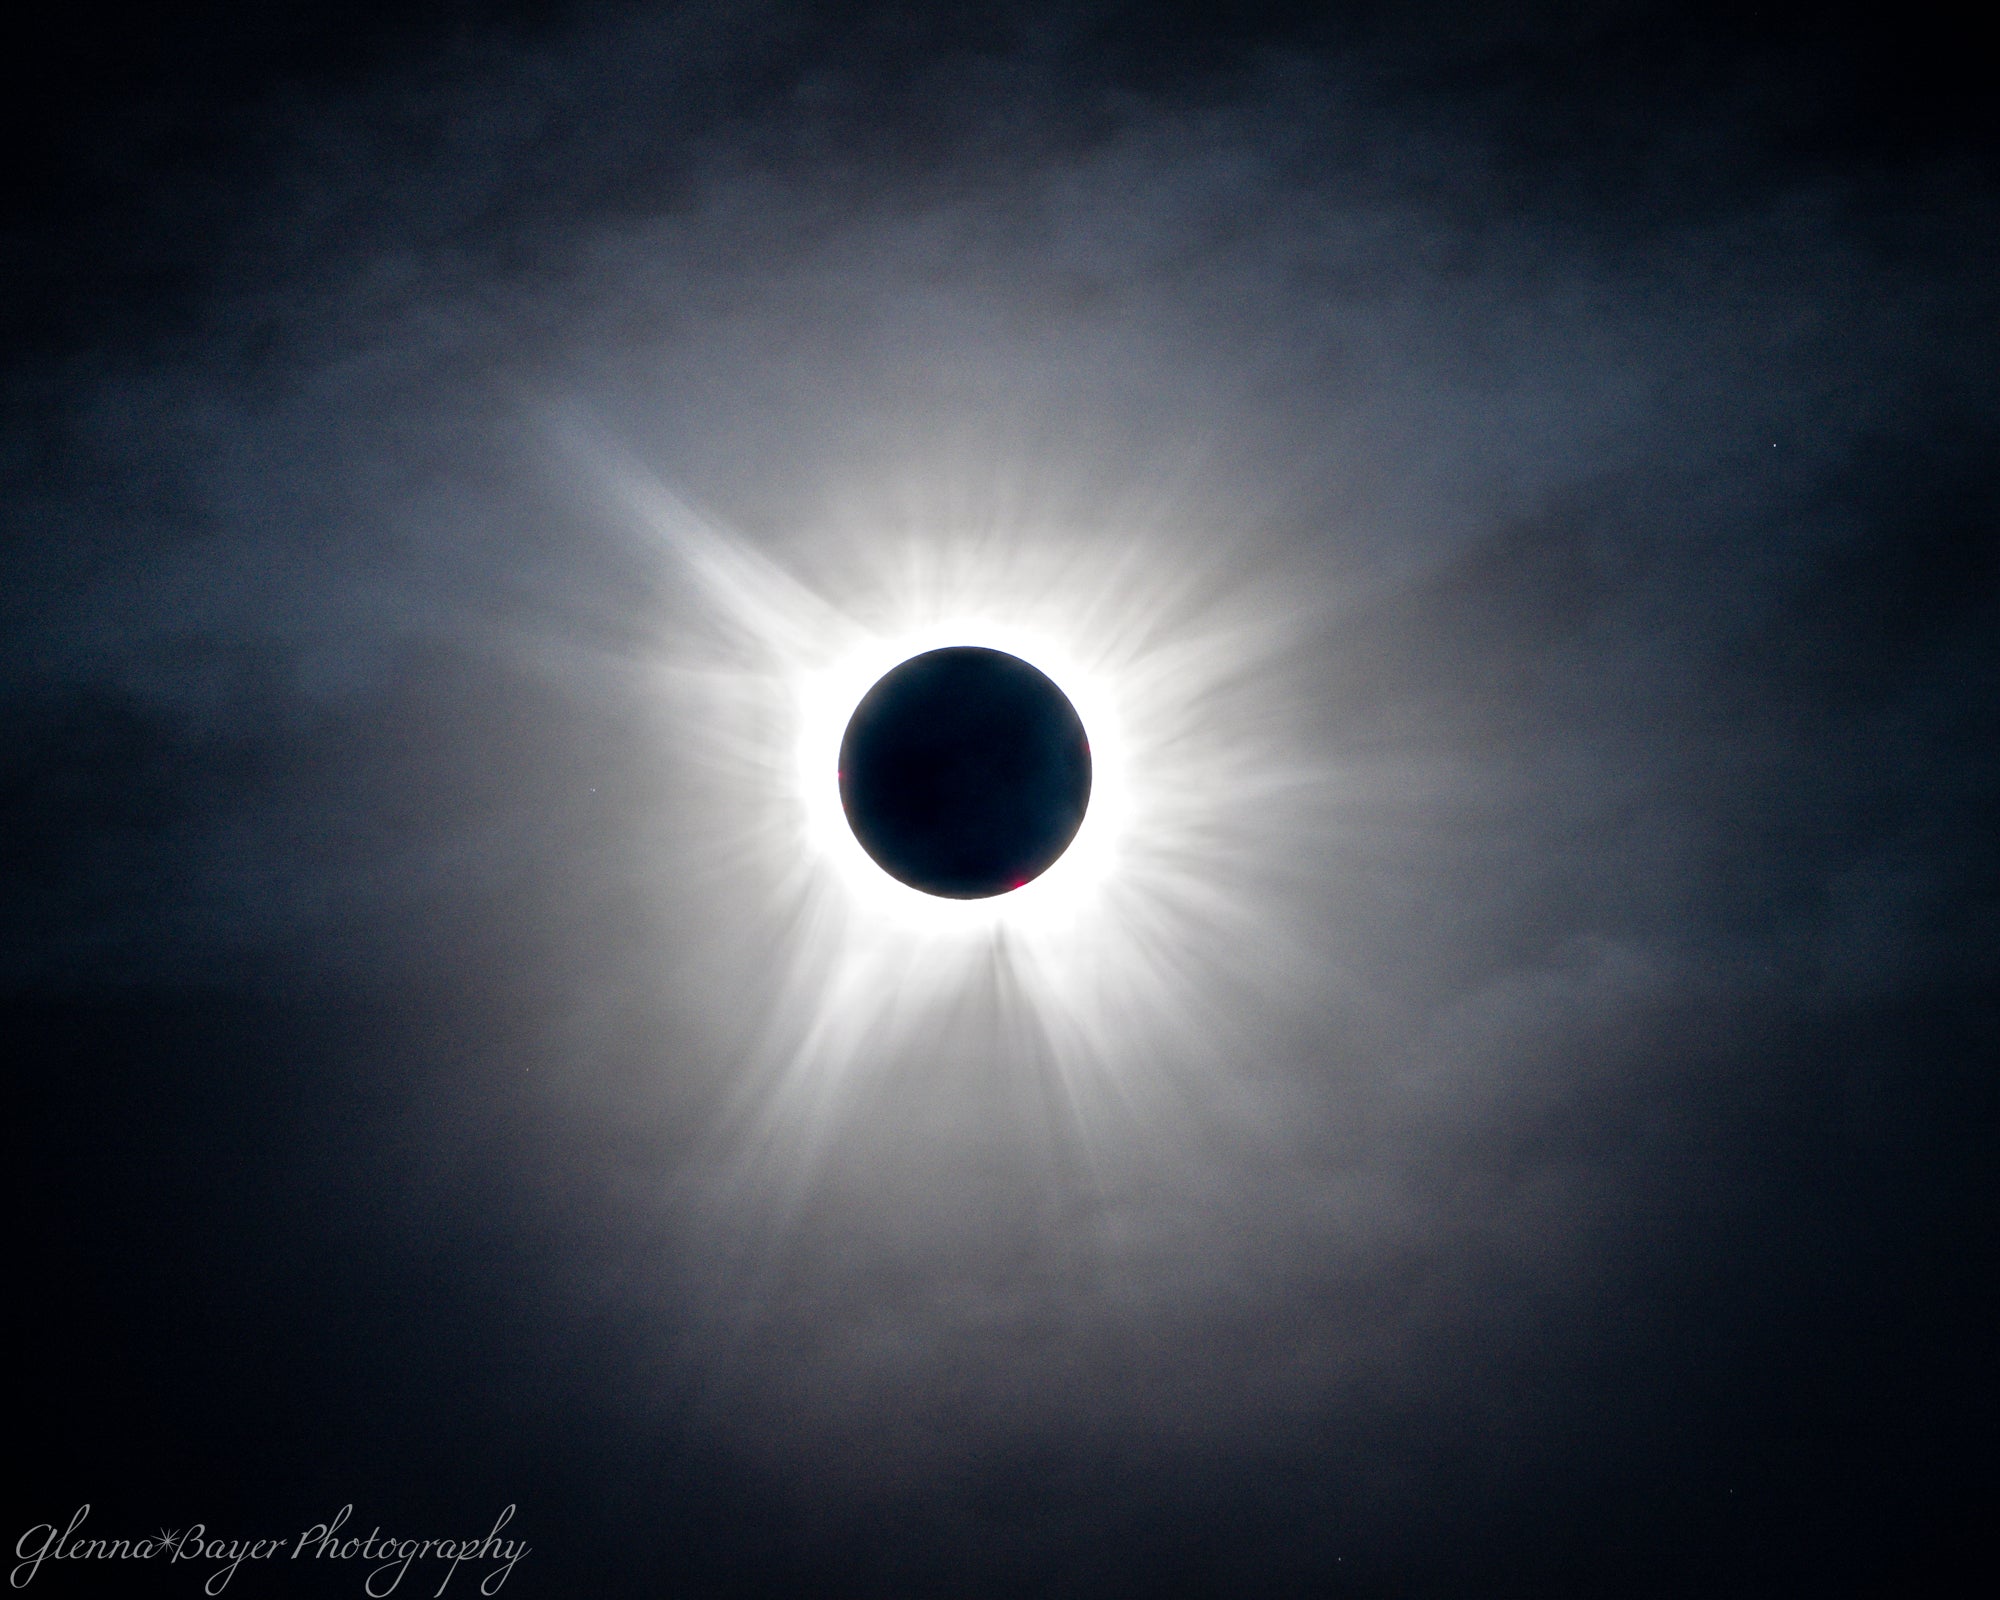 2024 eclipse in totality